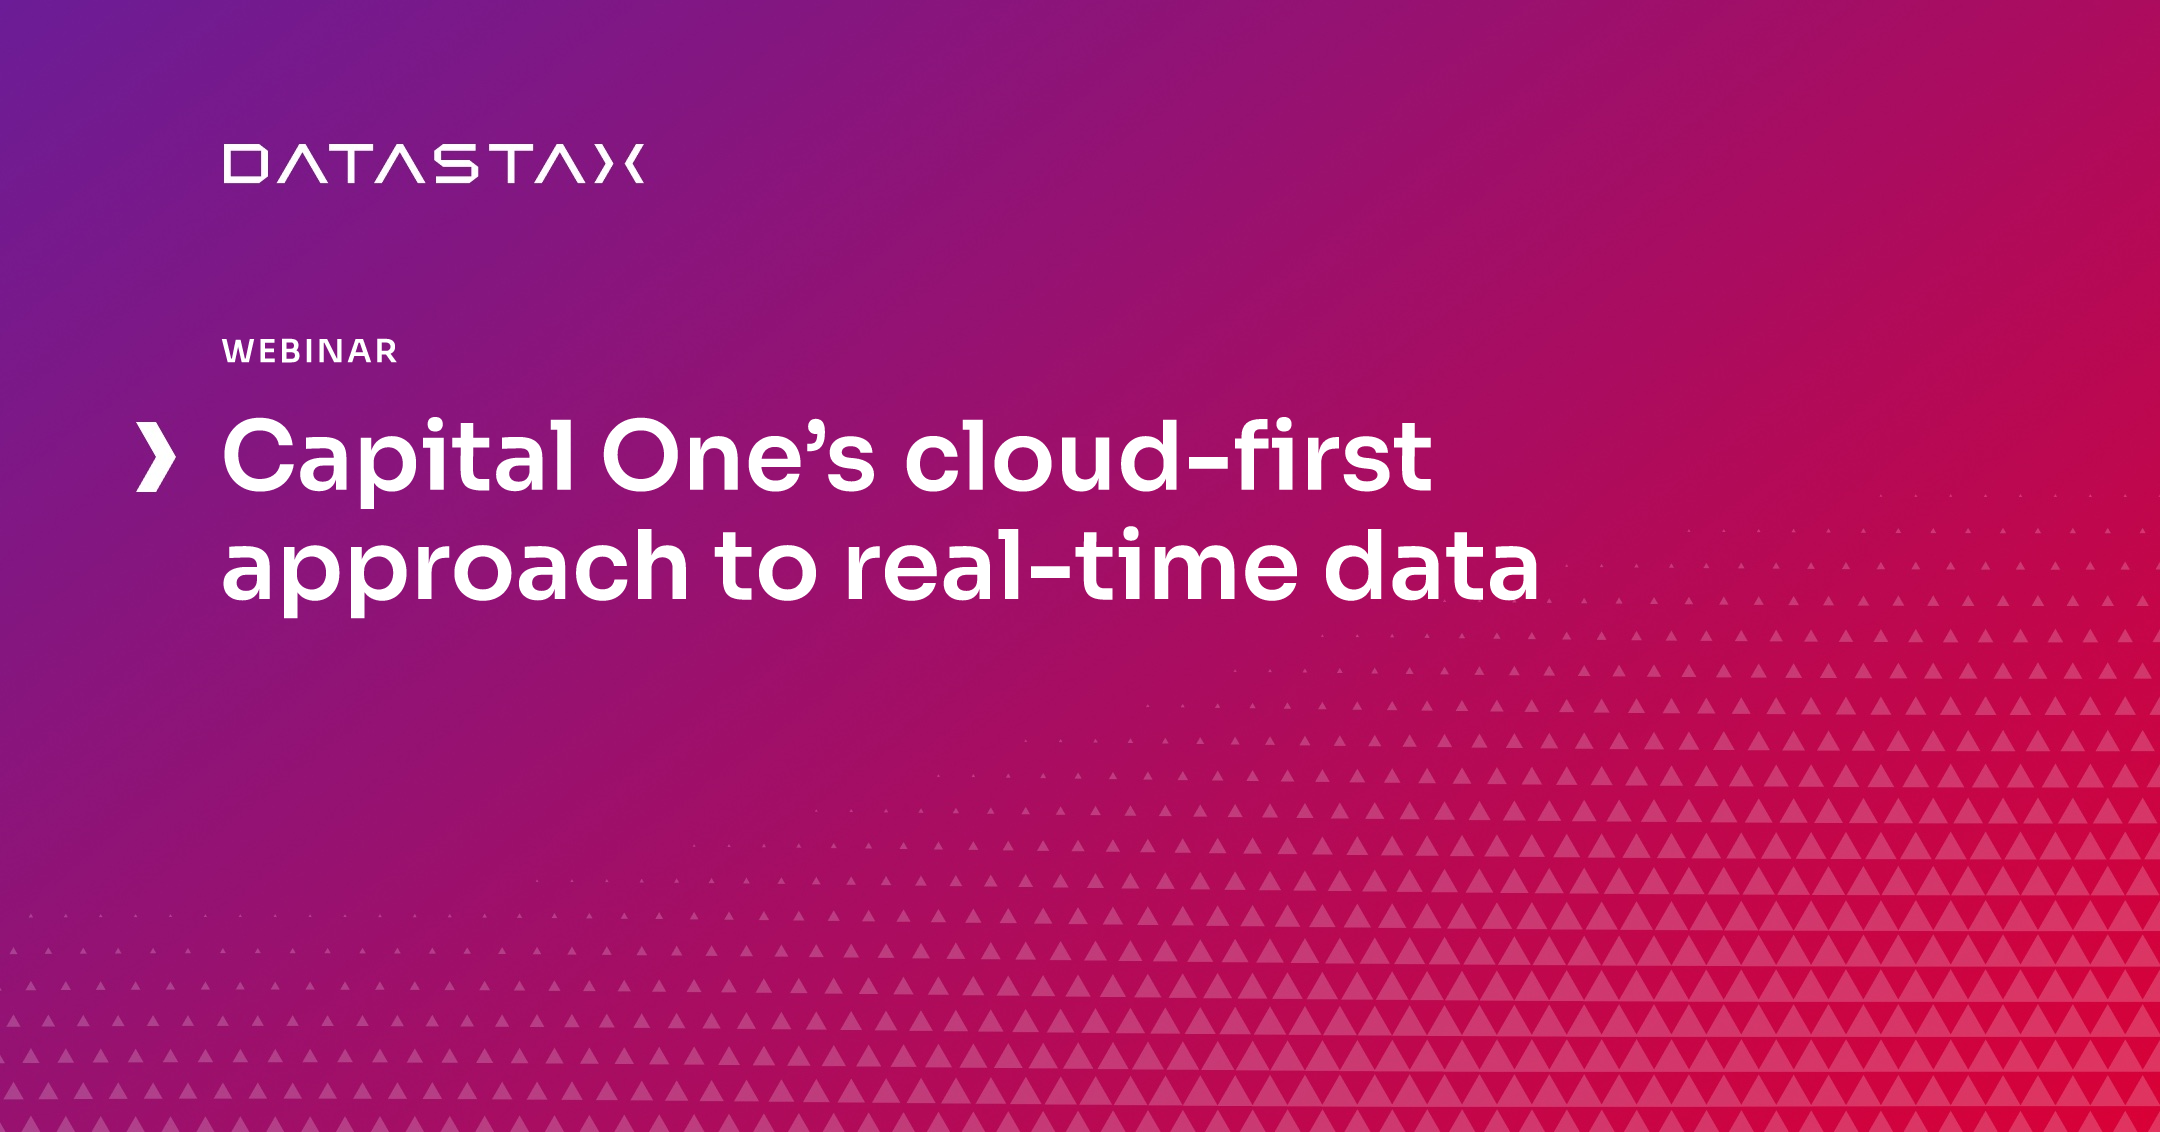 Capital One’s cloud-first approach to real-time data